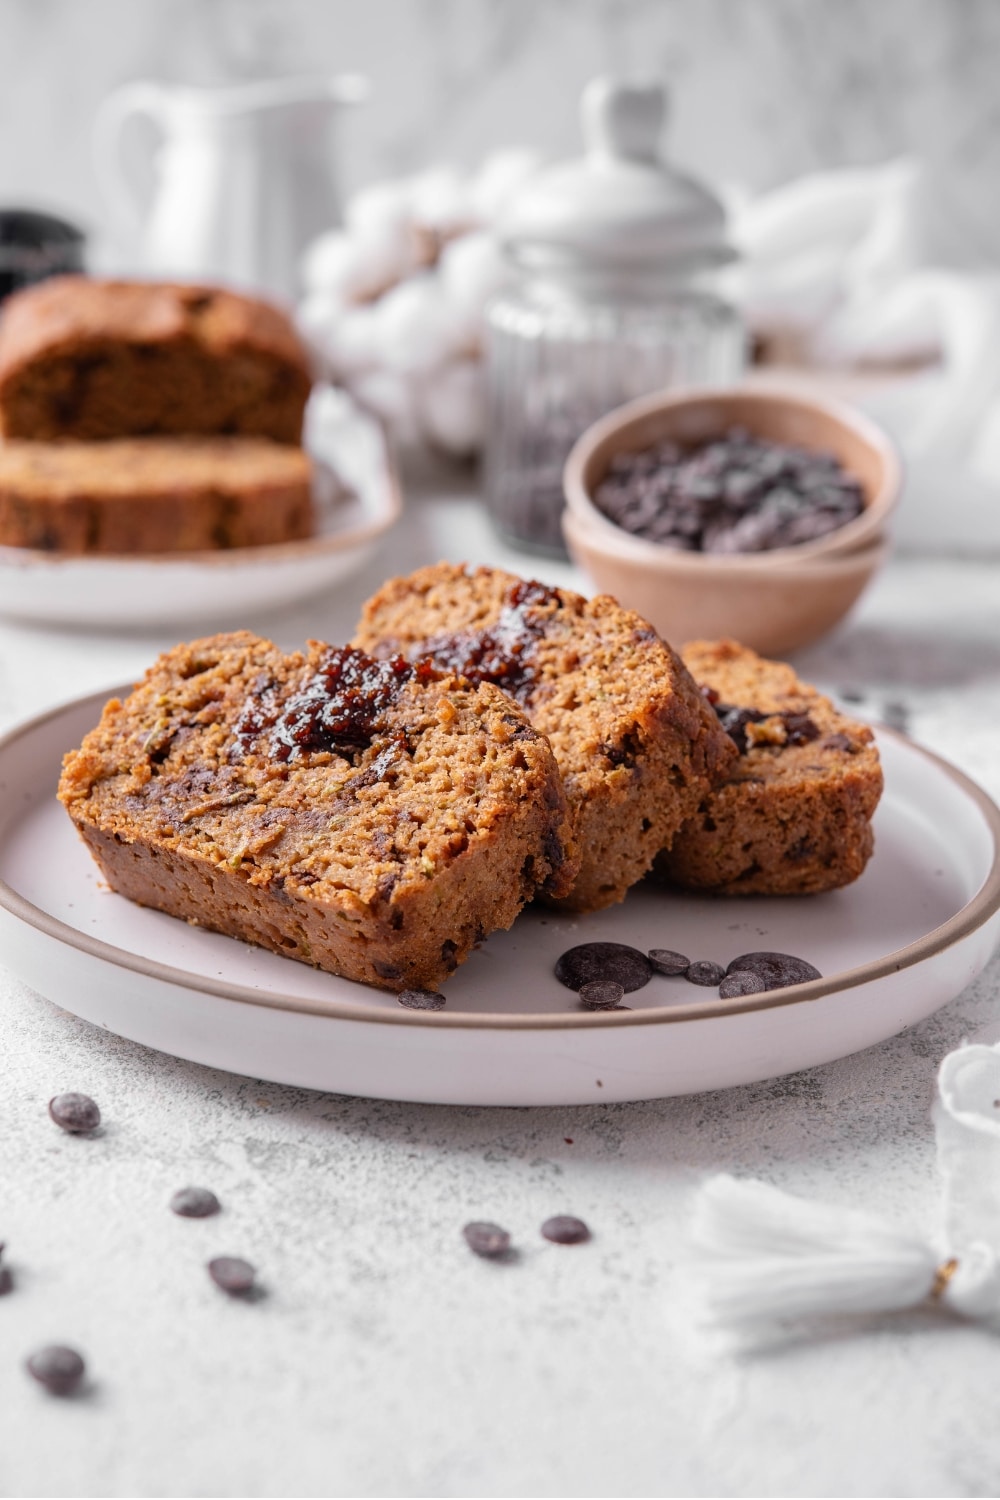 Three slices of low calorie zucchini bread with chocolate chips arranged on a white ceramic plate. There are a few chocolate chips scattered with another loaf of bread and bowl of chocolate chips in the background.